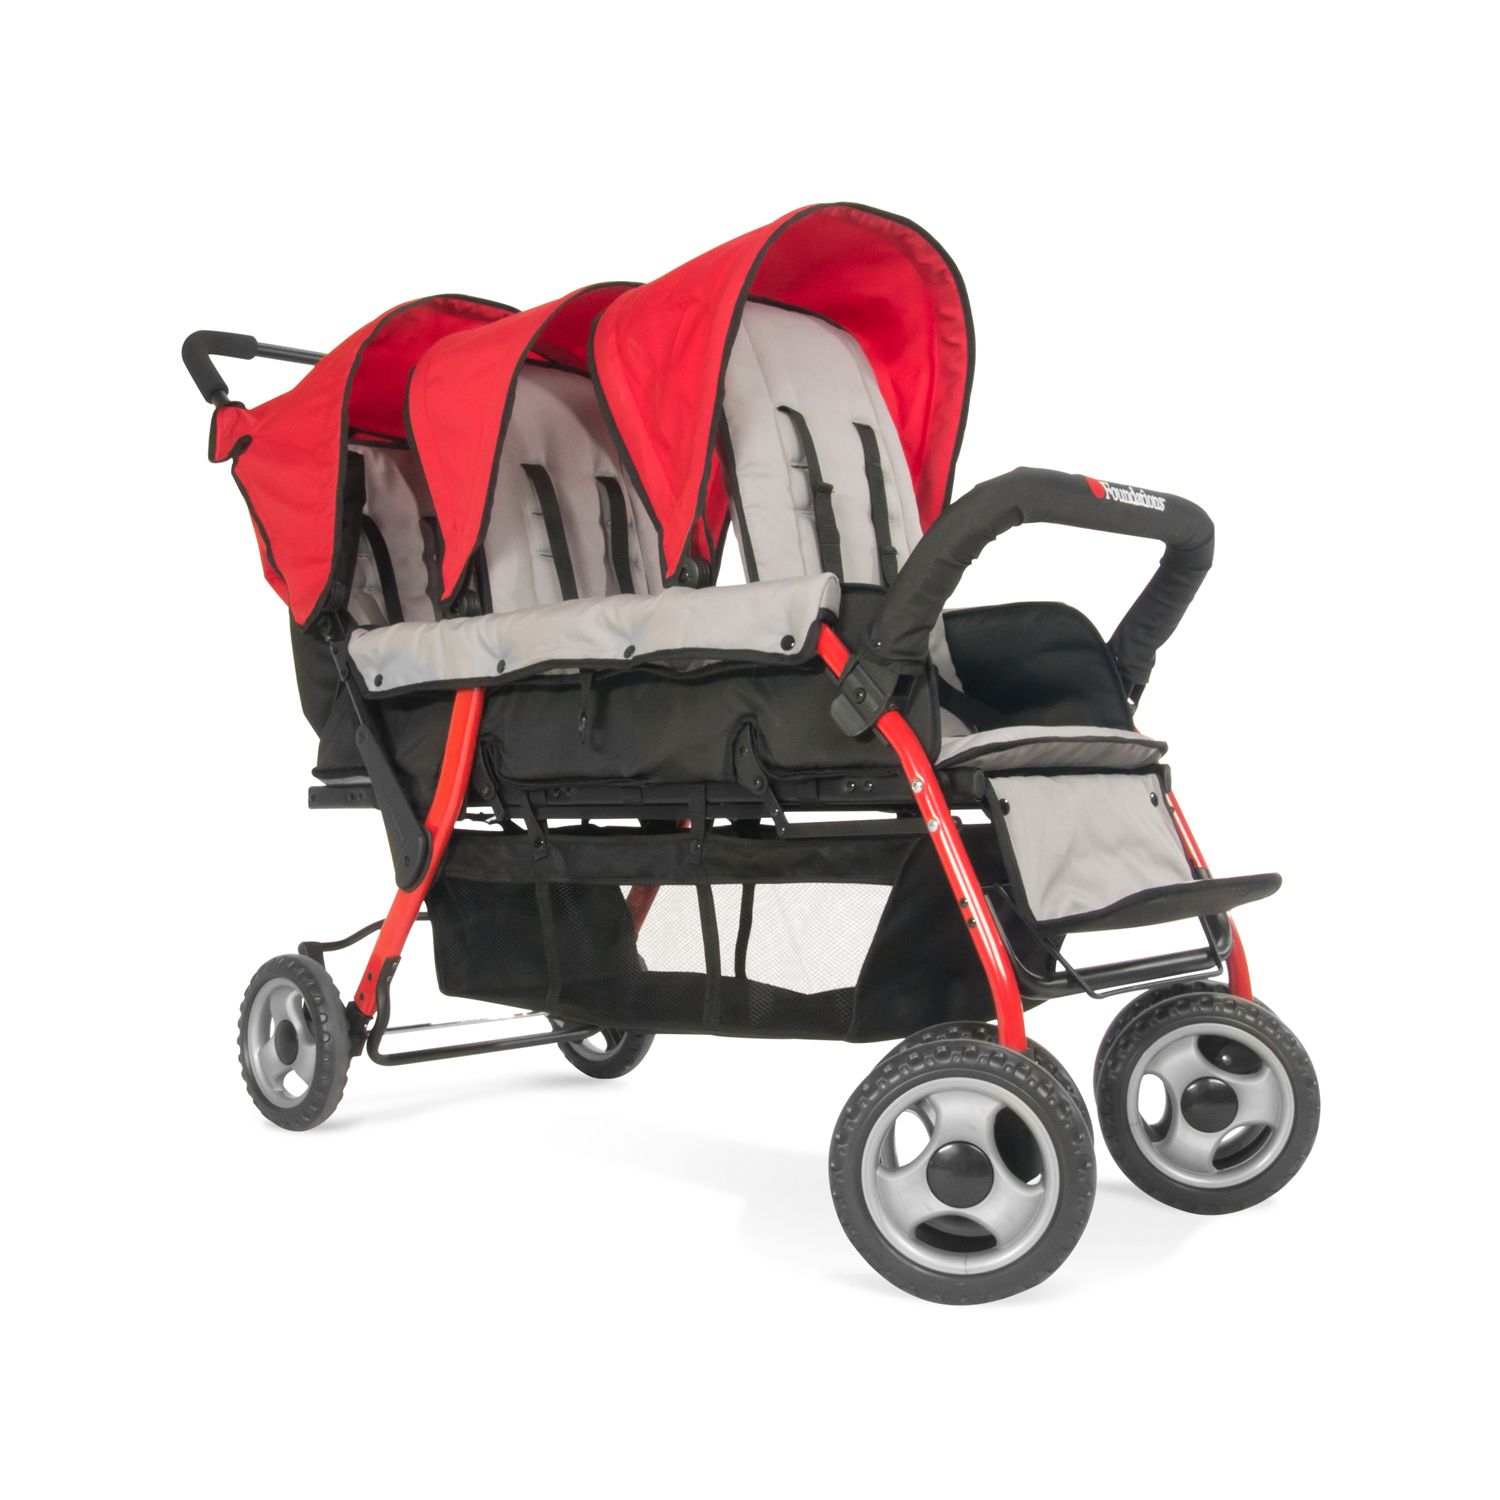 childcare two up tandem stroller